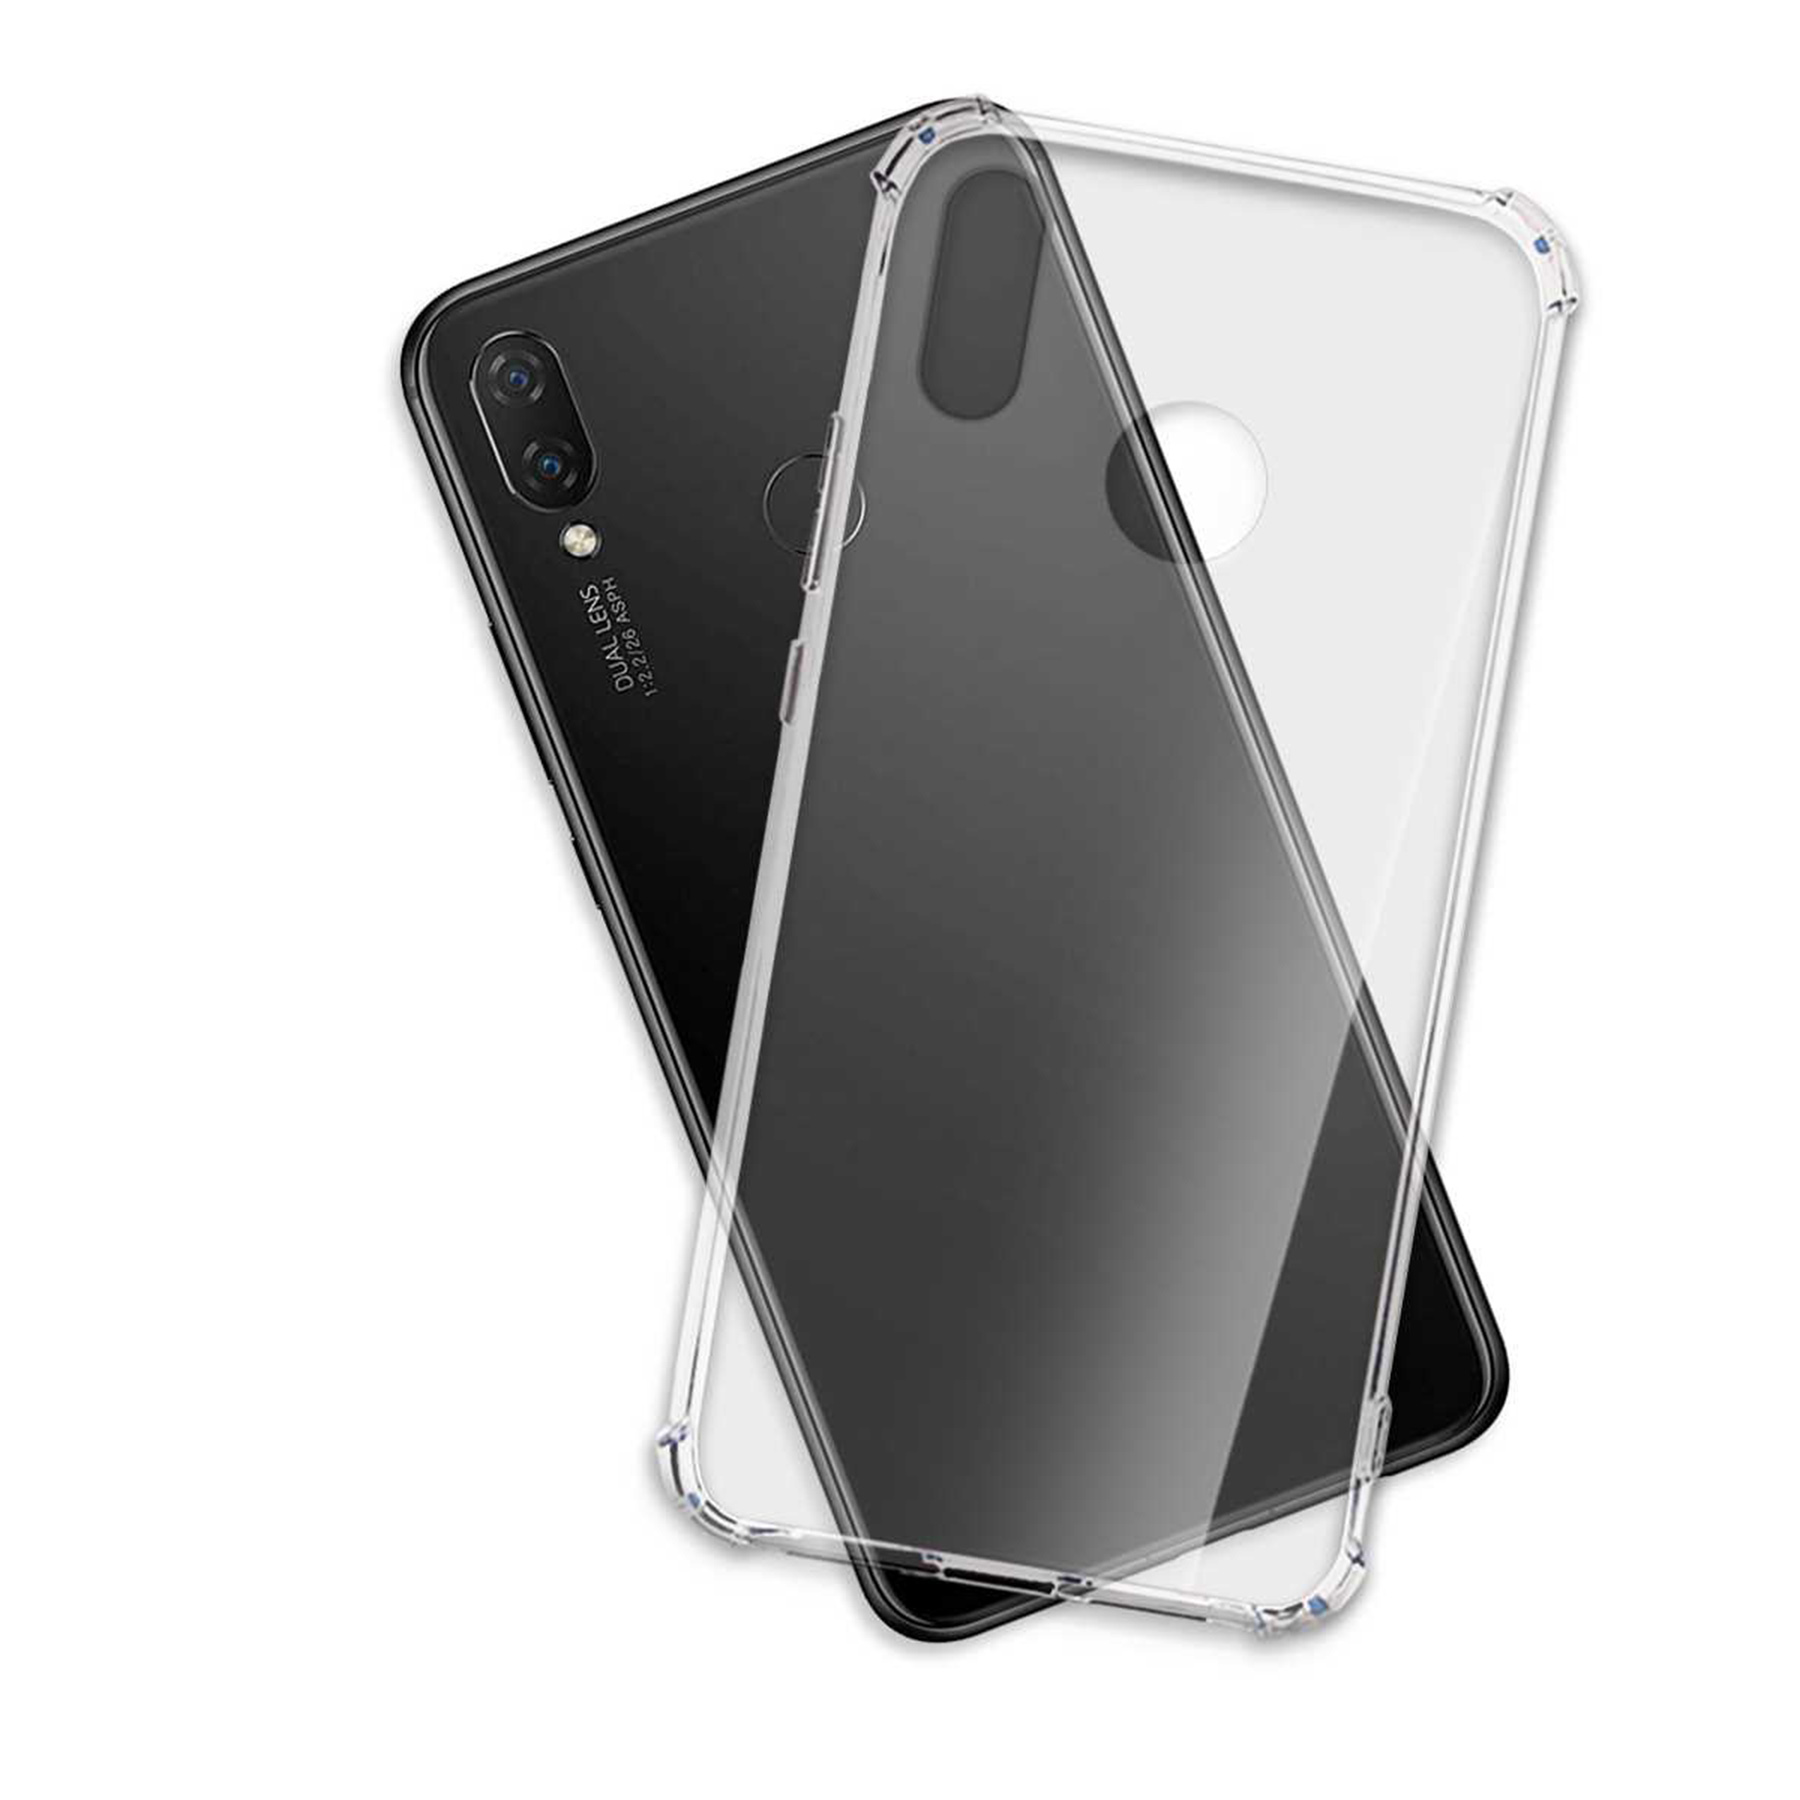 Armor Transparent MTB Case, MORE P Clear Backcover, ENERGY Smart Huawei, Plus,